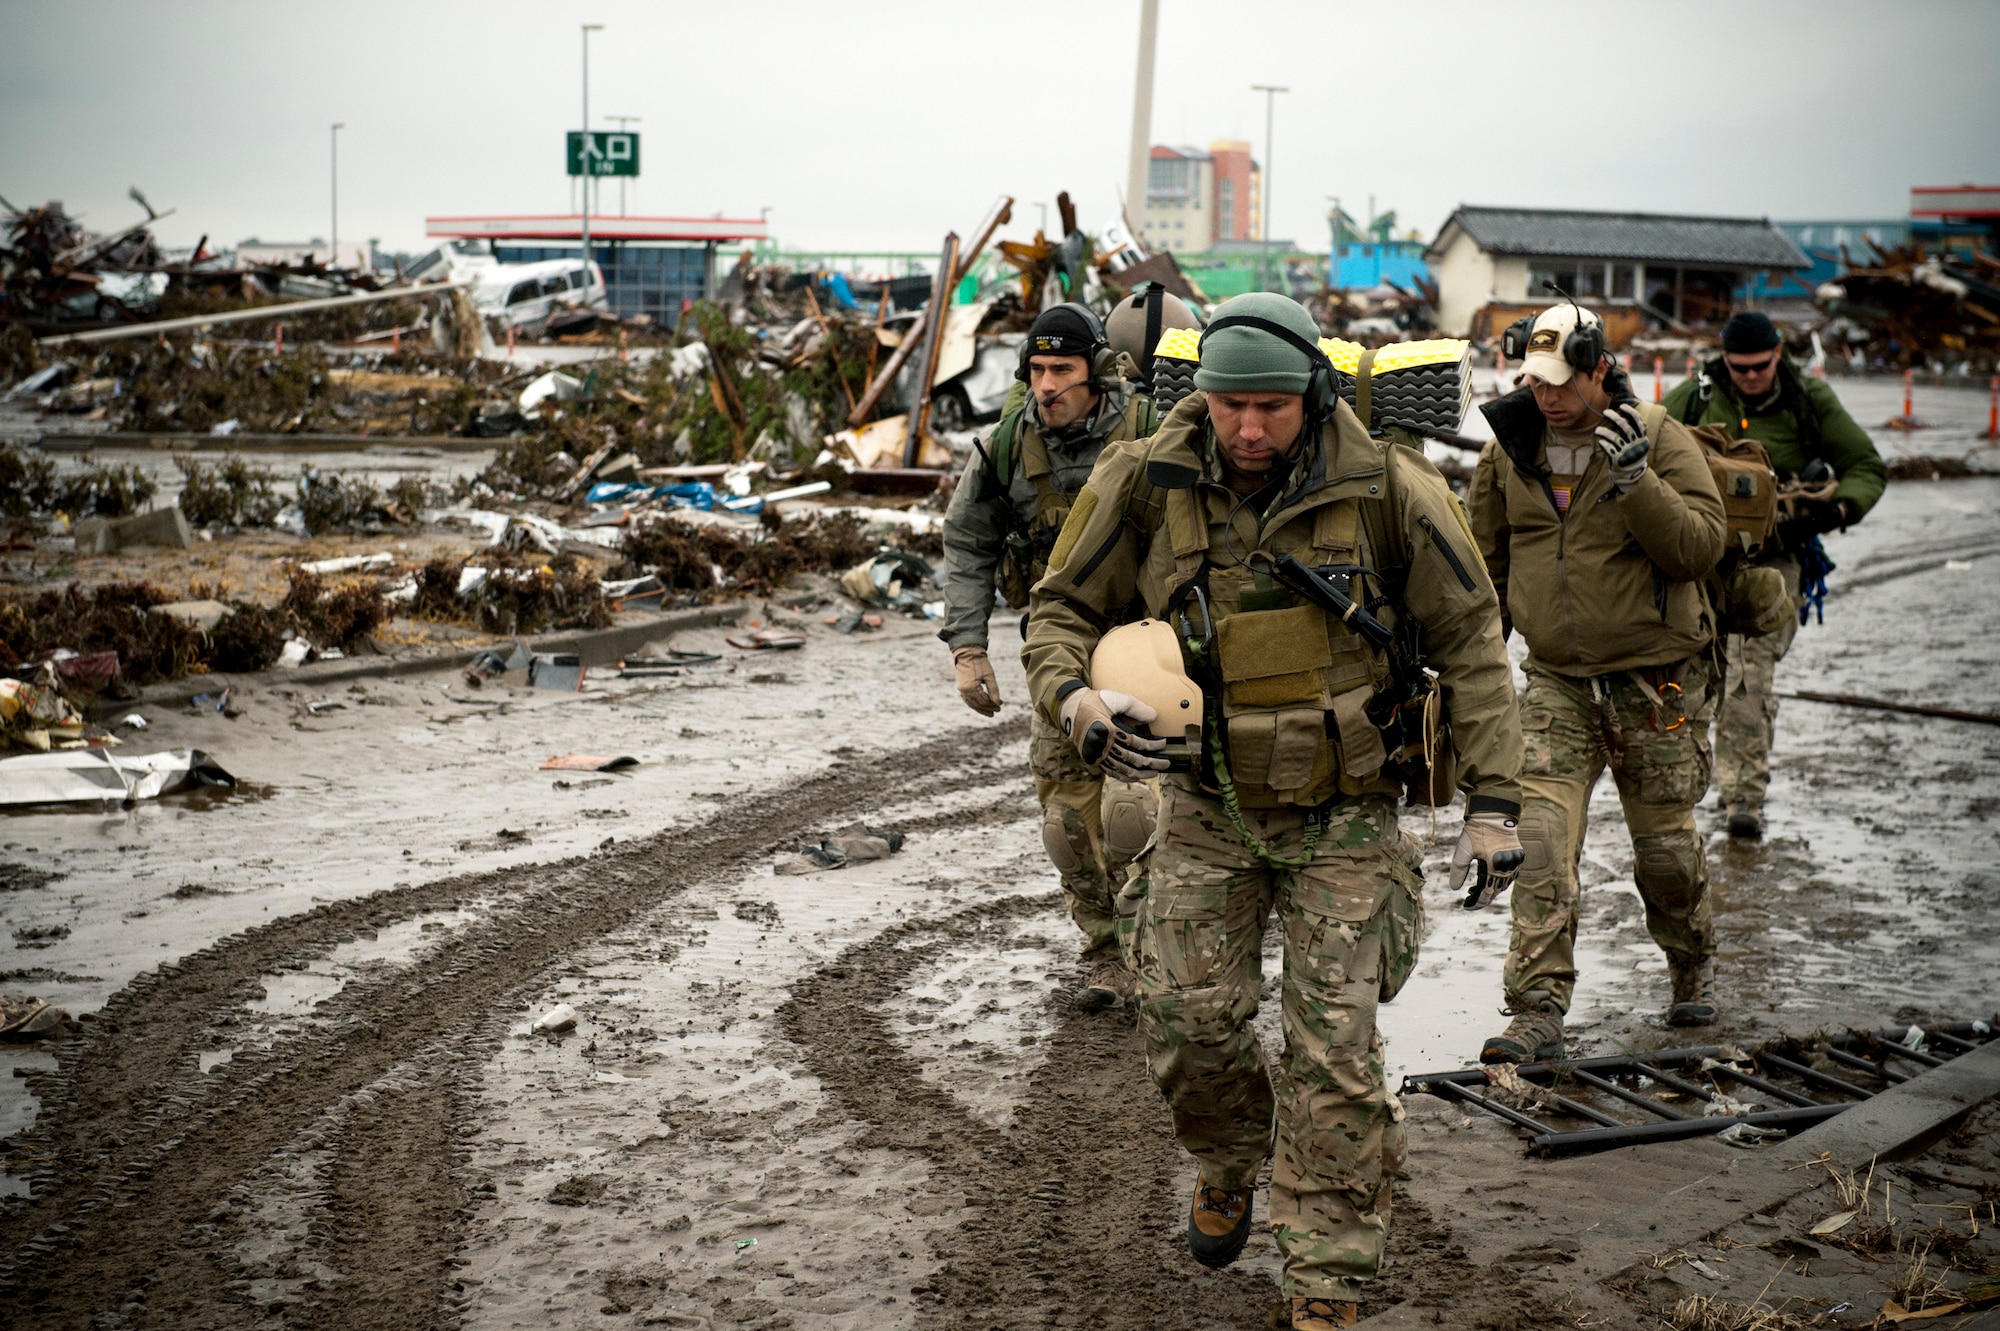 Members of the 320th Special Tactics Squadron assess the damage at
Sendai Airport in Japan, March 16, 2011. The 353rd Special Operations Group's involvement in OperationTomodachi is one of the many examples that contributed to earning the Meritorious Unit Award. (U.S. Air Force photo/Staff Sgt. Samuel Morse) 
